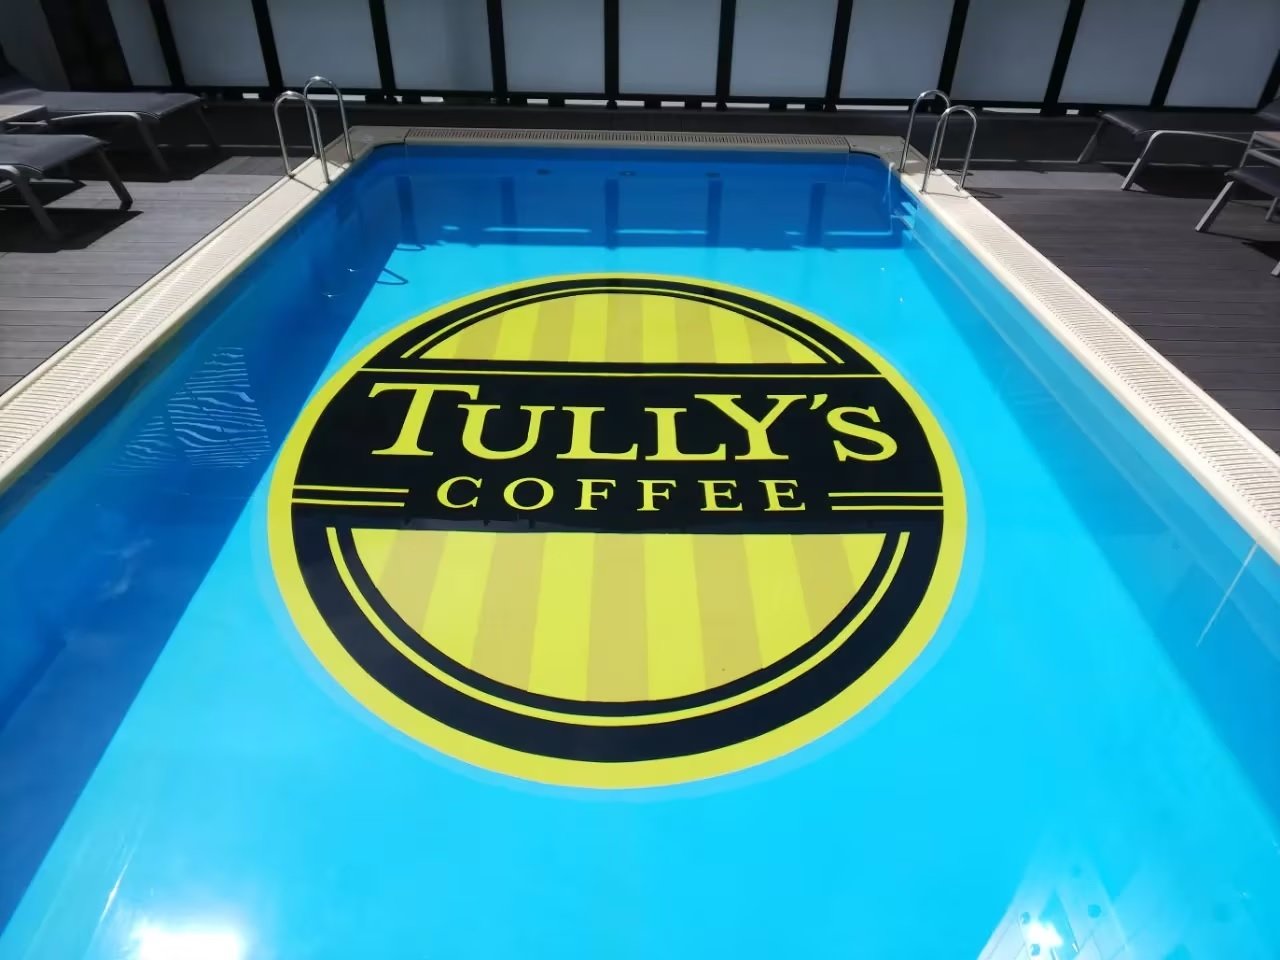 8K TULLY'S COFFEE POOL